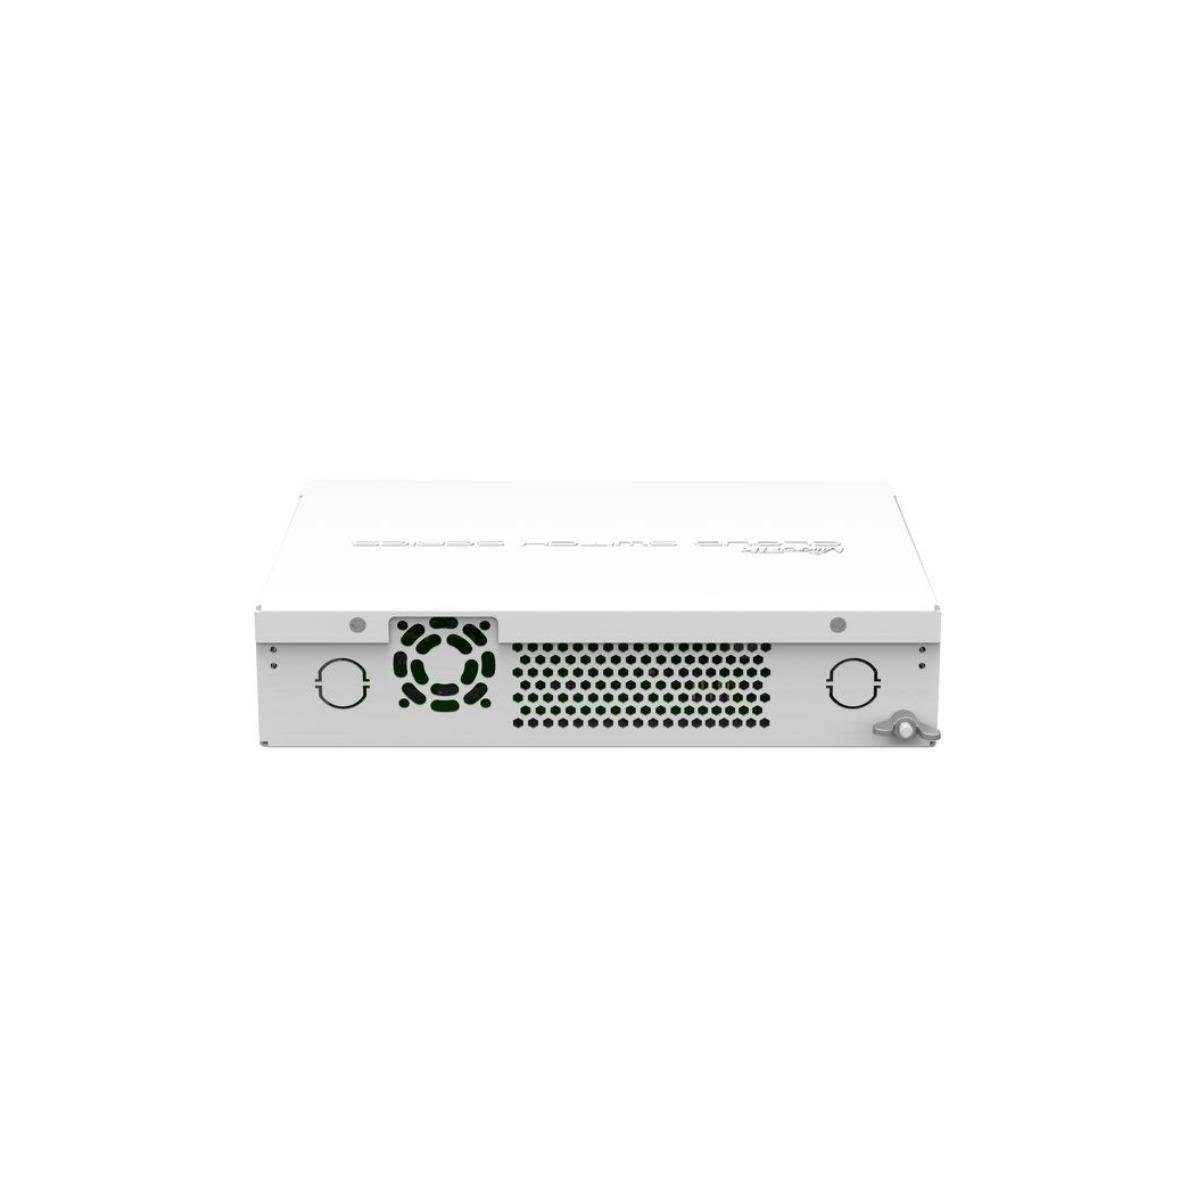 MikroTik CRS112-8G-4S-IN - 400 MHz, SFP, 128 OS 4 5 Router 8-Port, Netzwerk-Switch MB